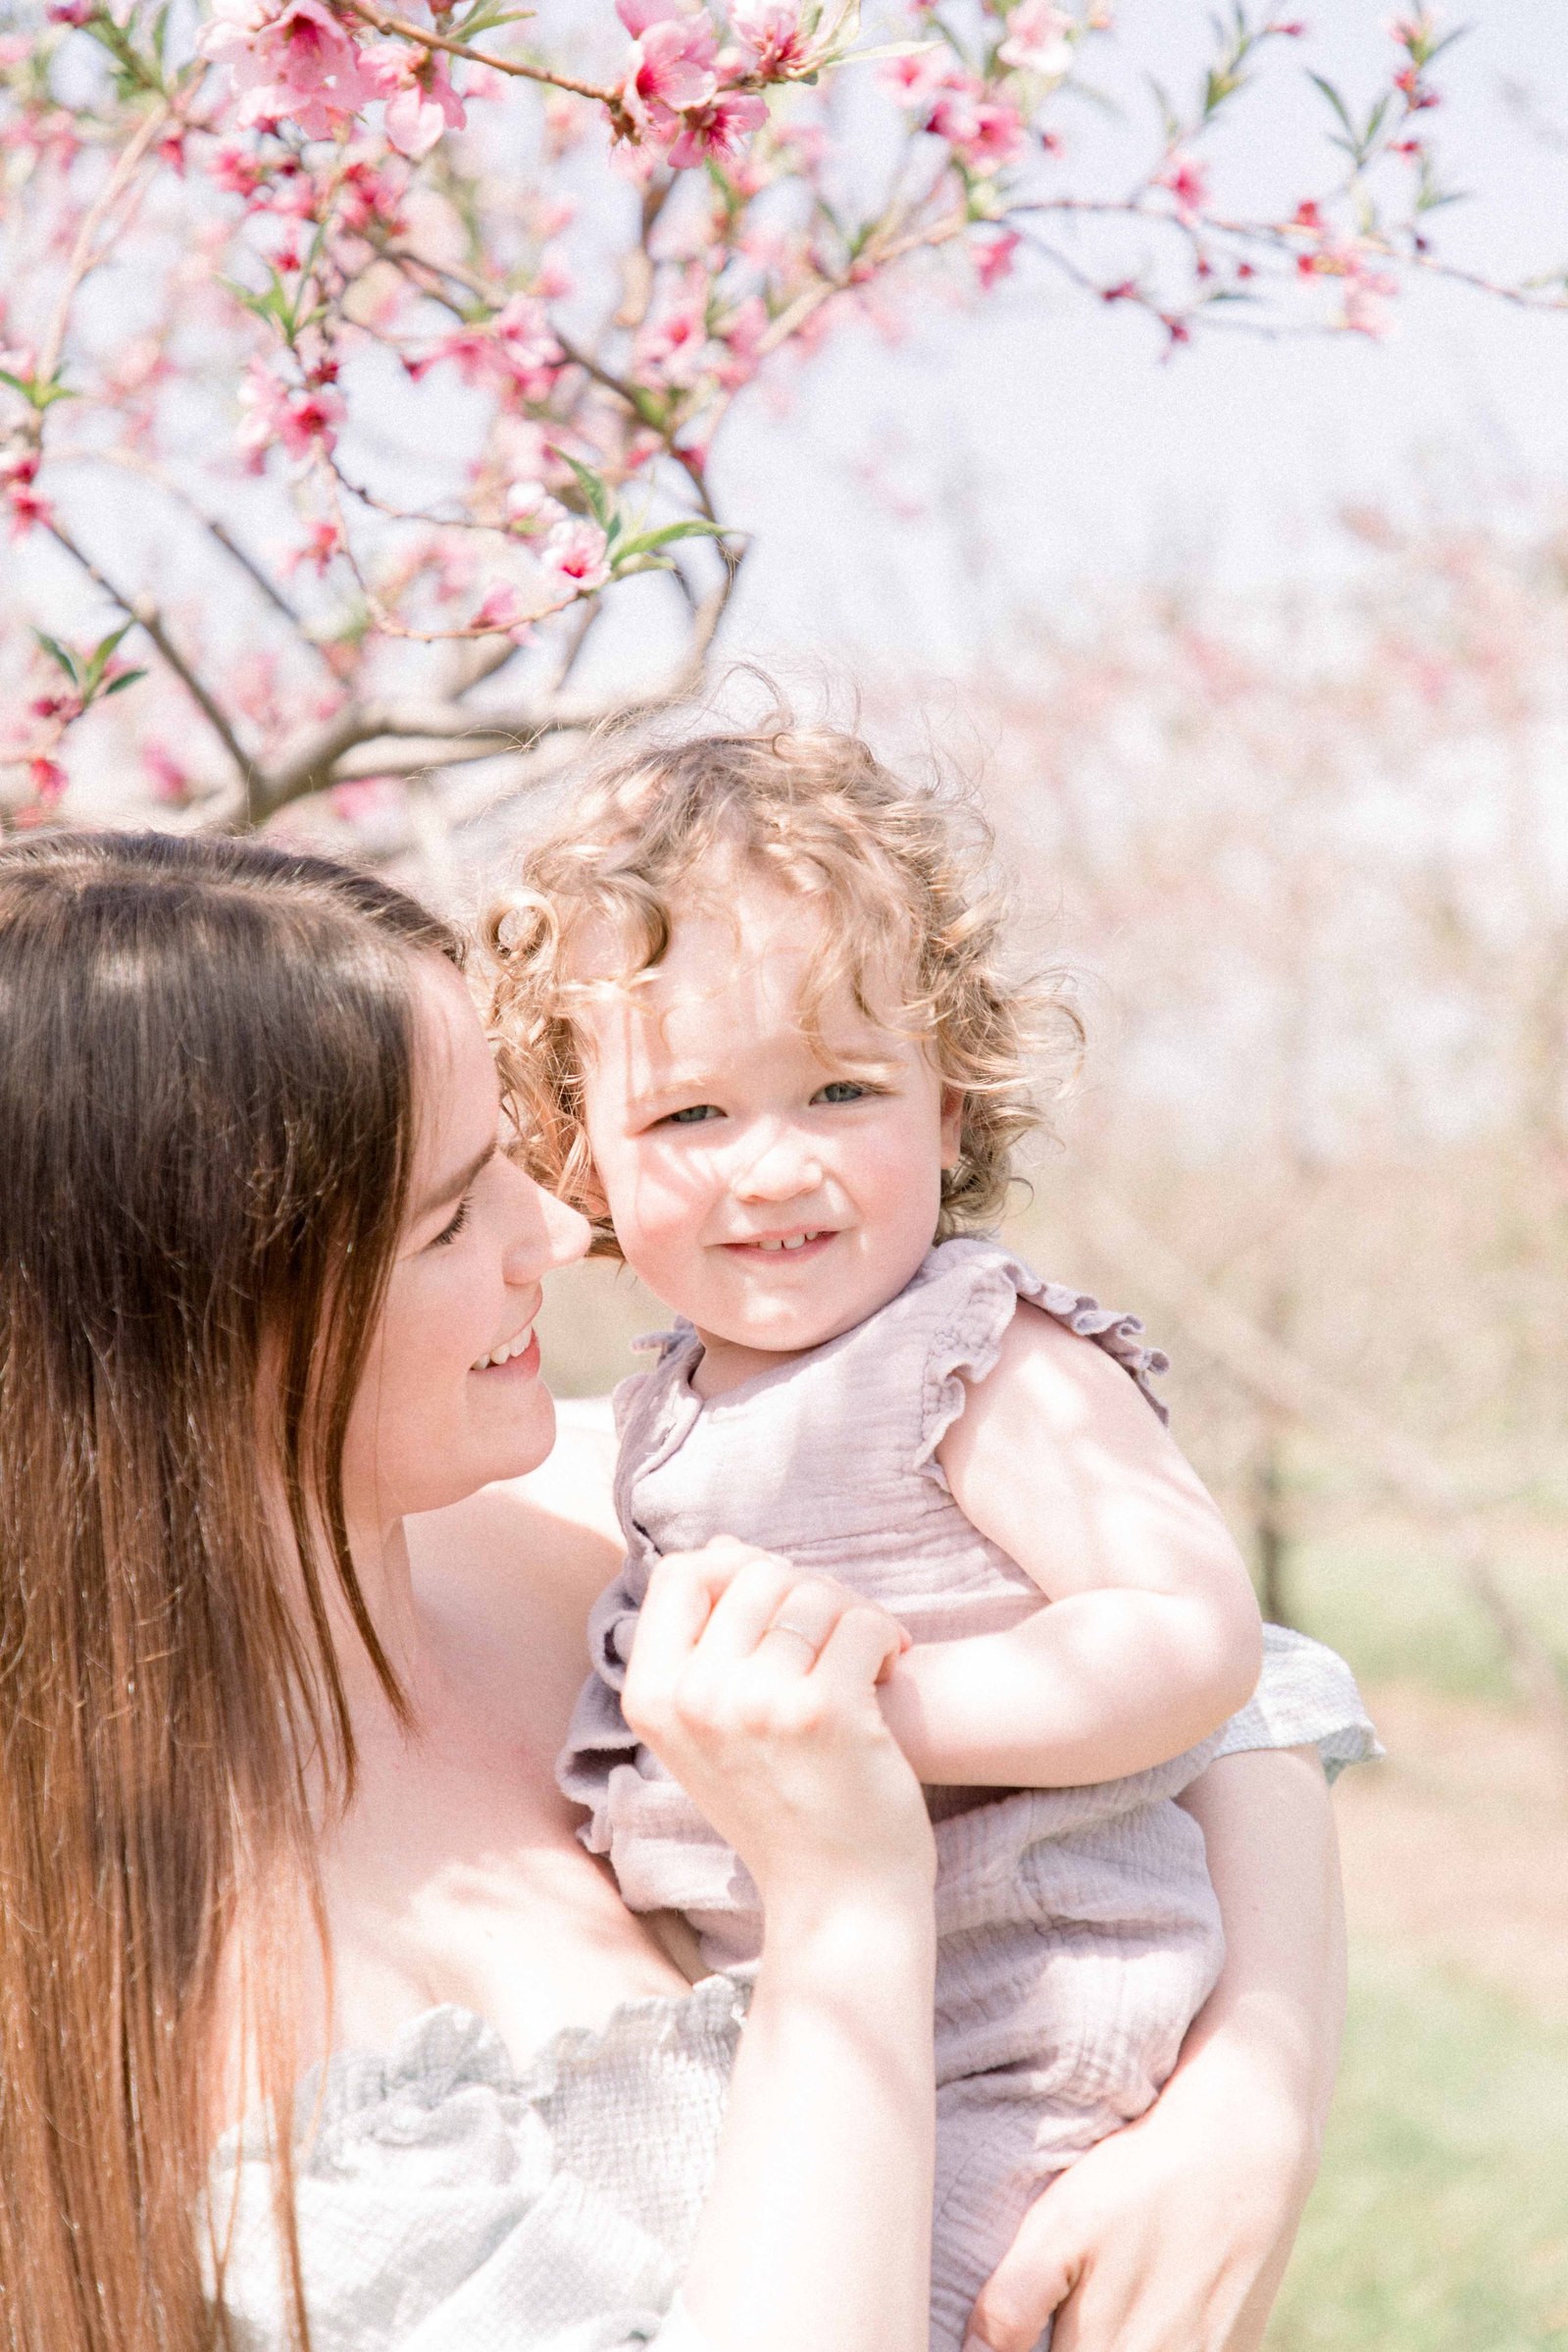 Portrait of mother and baby daughter in an orchard of fruit blossoms. Niagara Family Photographer, Niagara Portrait Photographer, Niagara Motherhood Photographer. Emily VanderBeek Photography, Emily VanderBeek Photo.